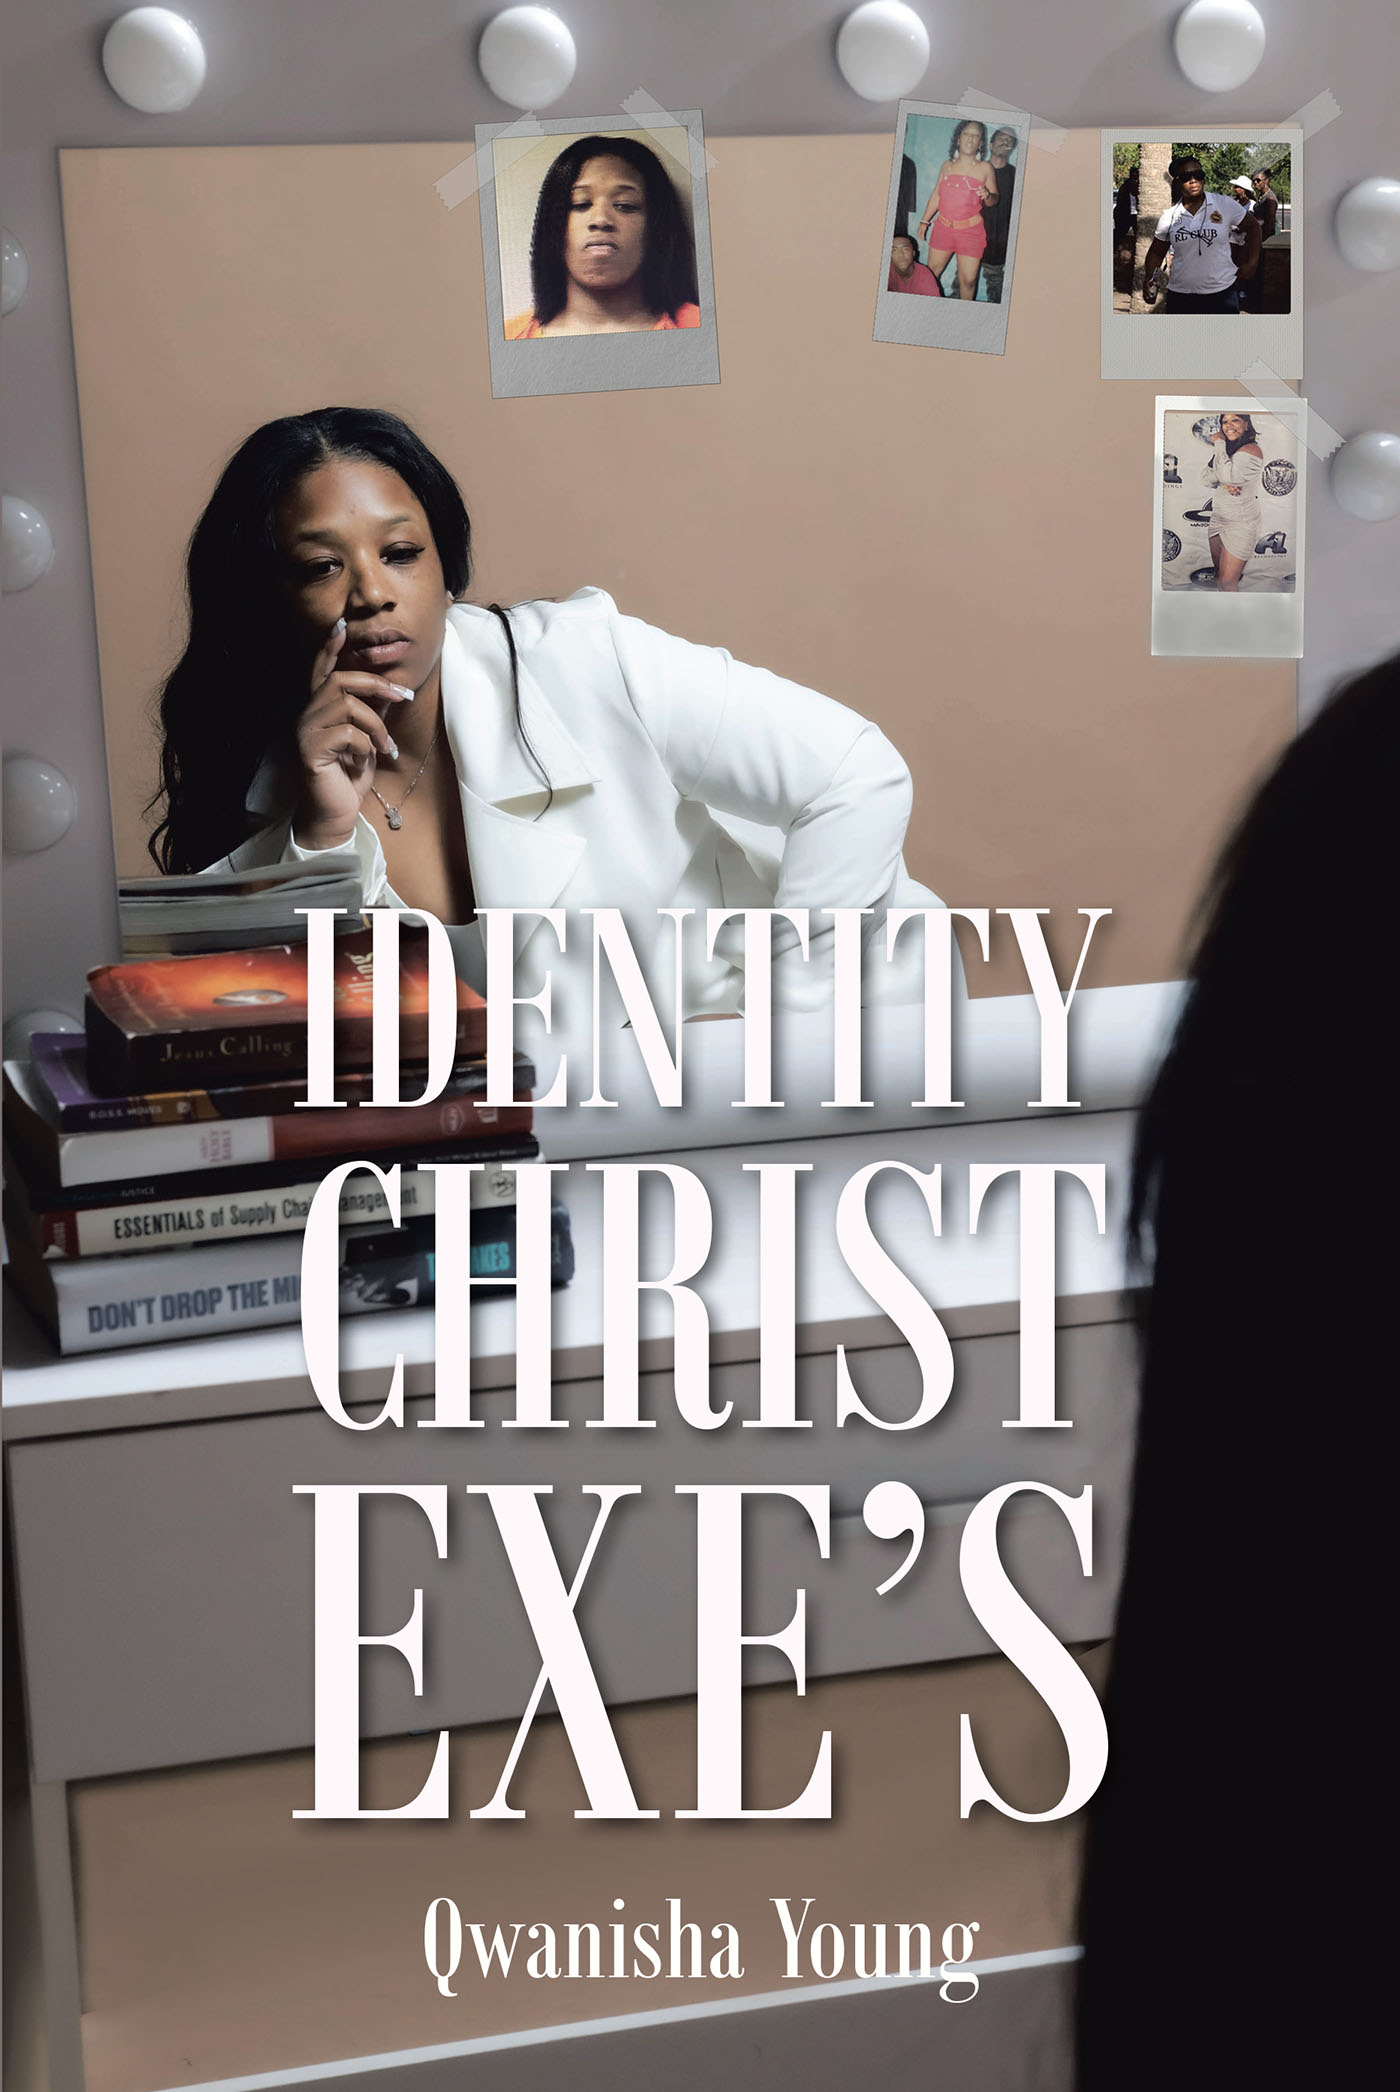 Qwanisha Young’s Newly Released "Identity Christ Exe’s" is an Empowering Message of the Transformational Power of Connection with God